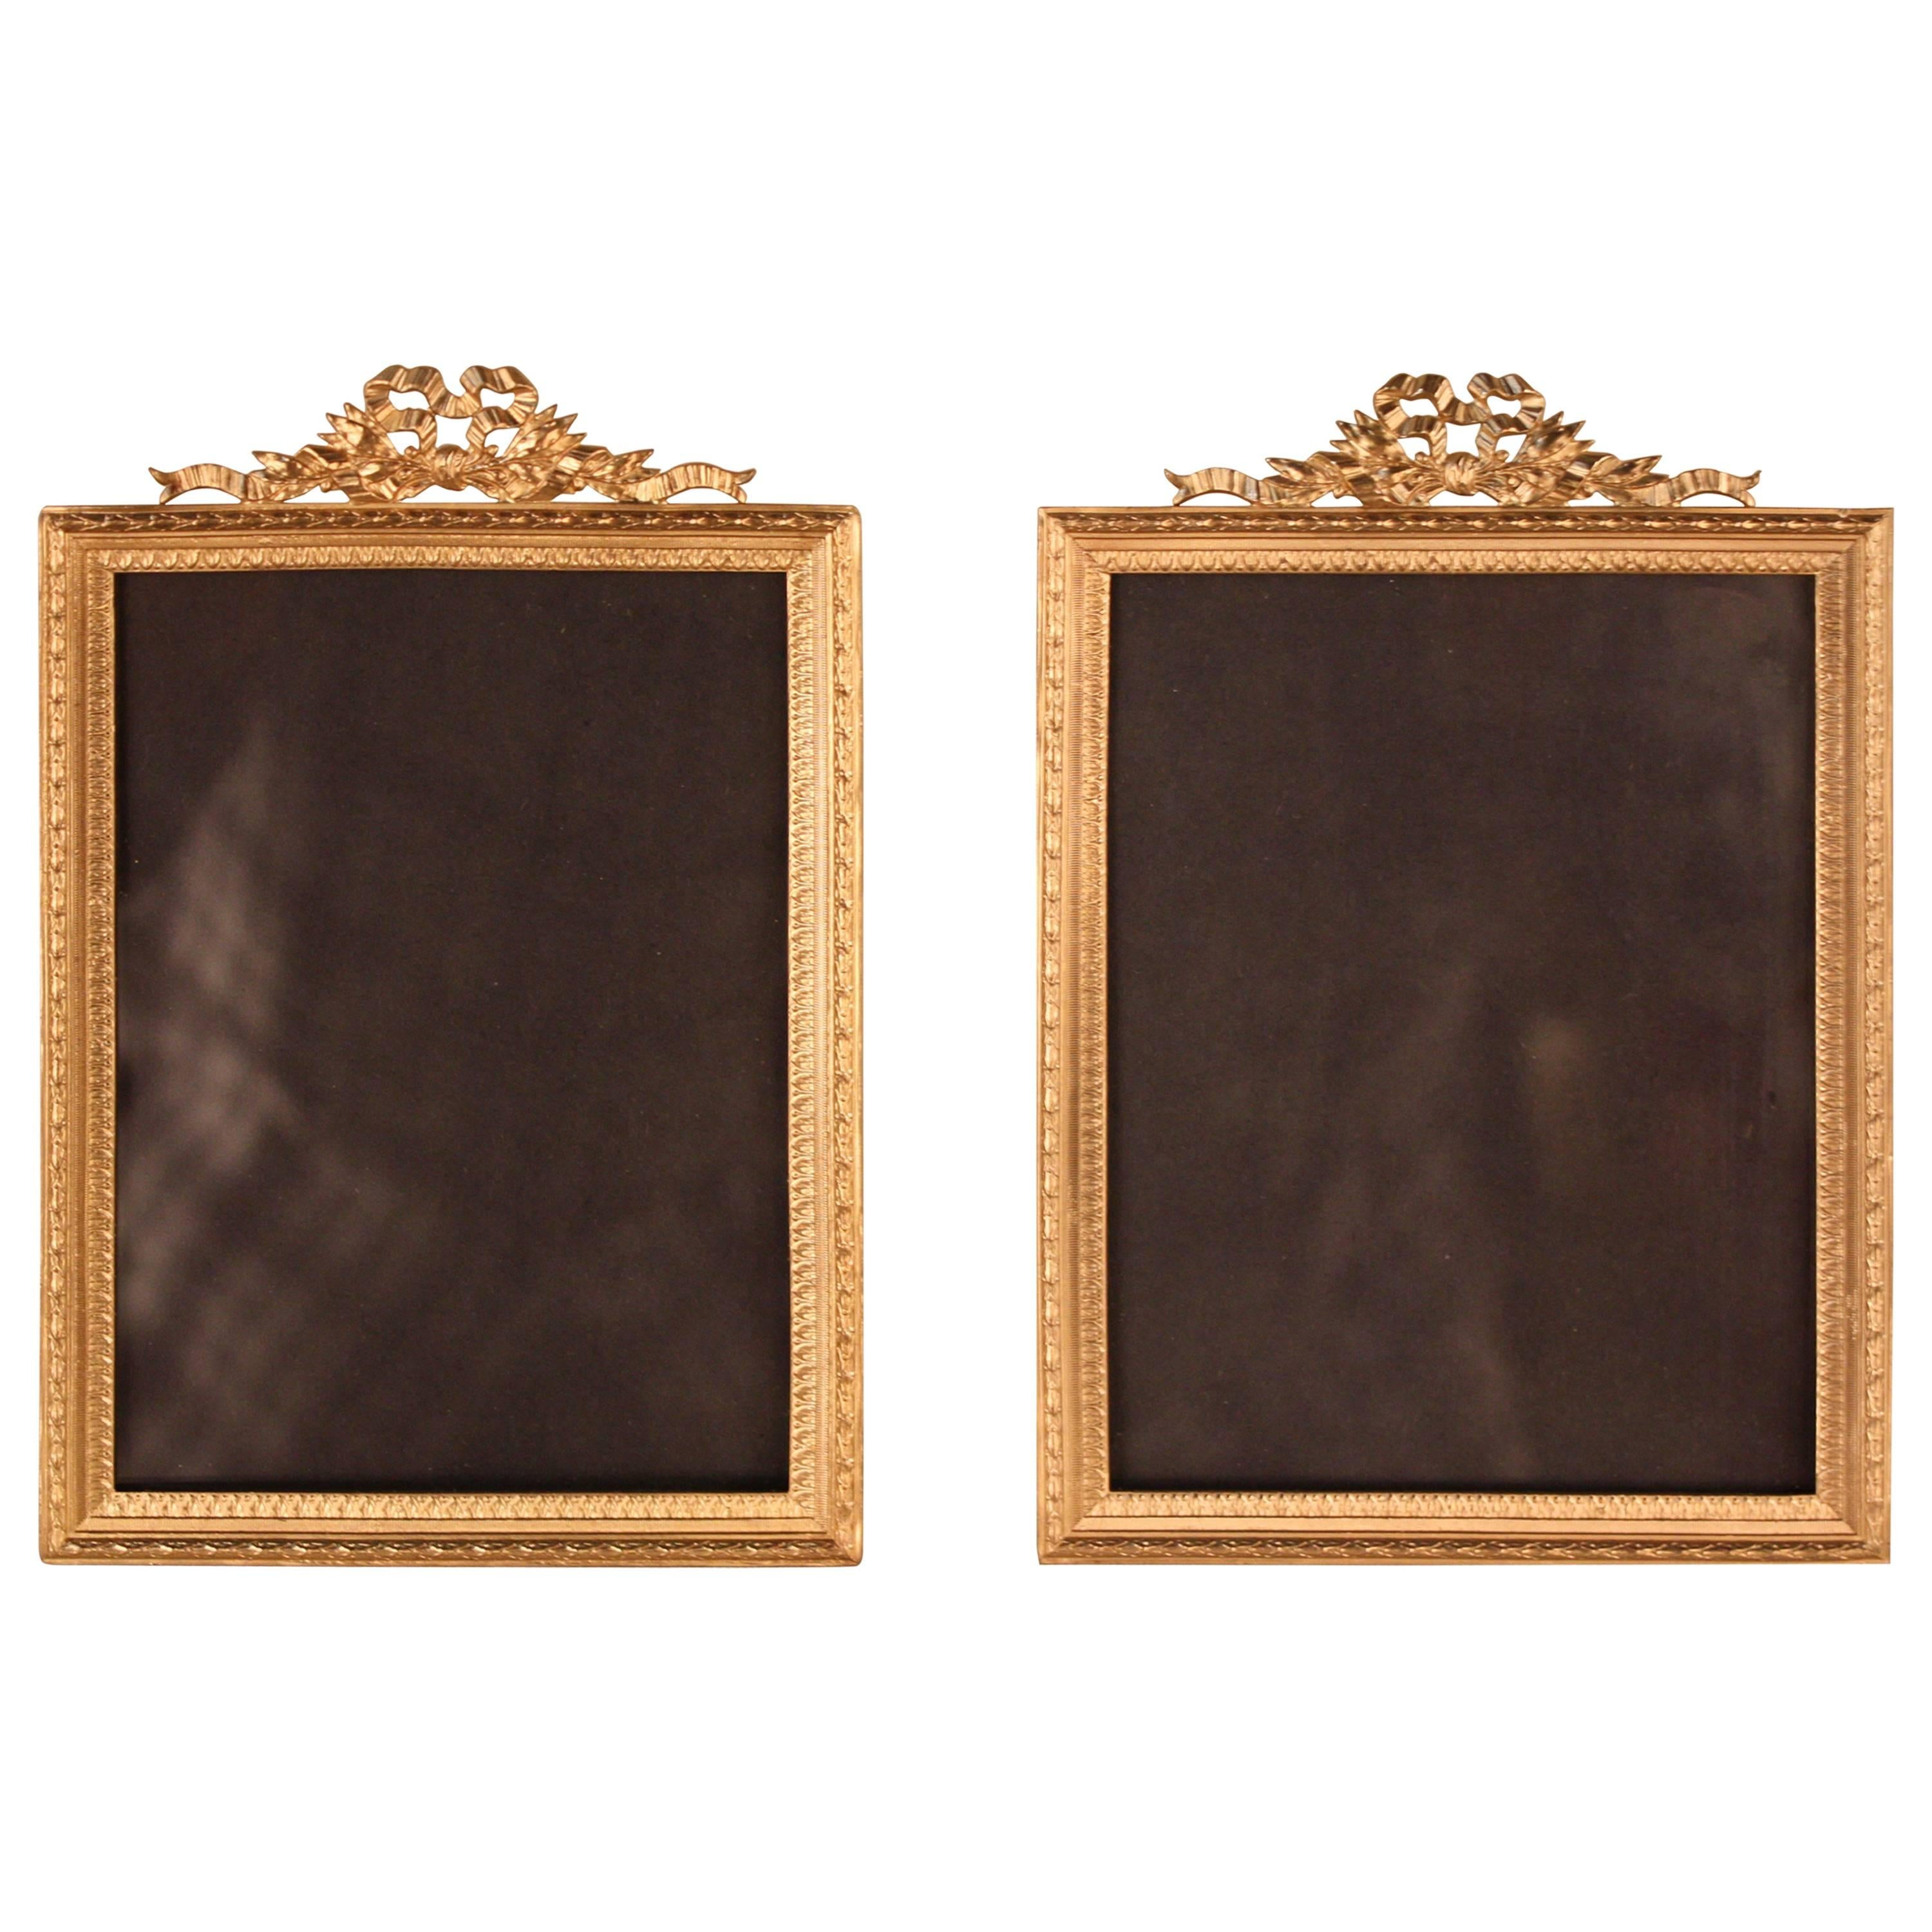 Pair of French Dore Bronze Photo Frames